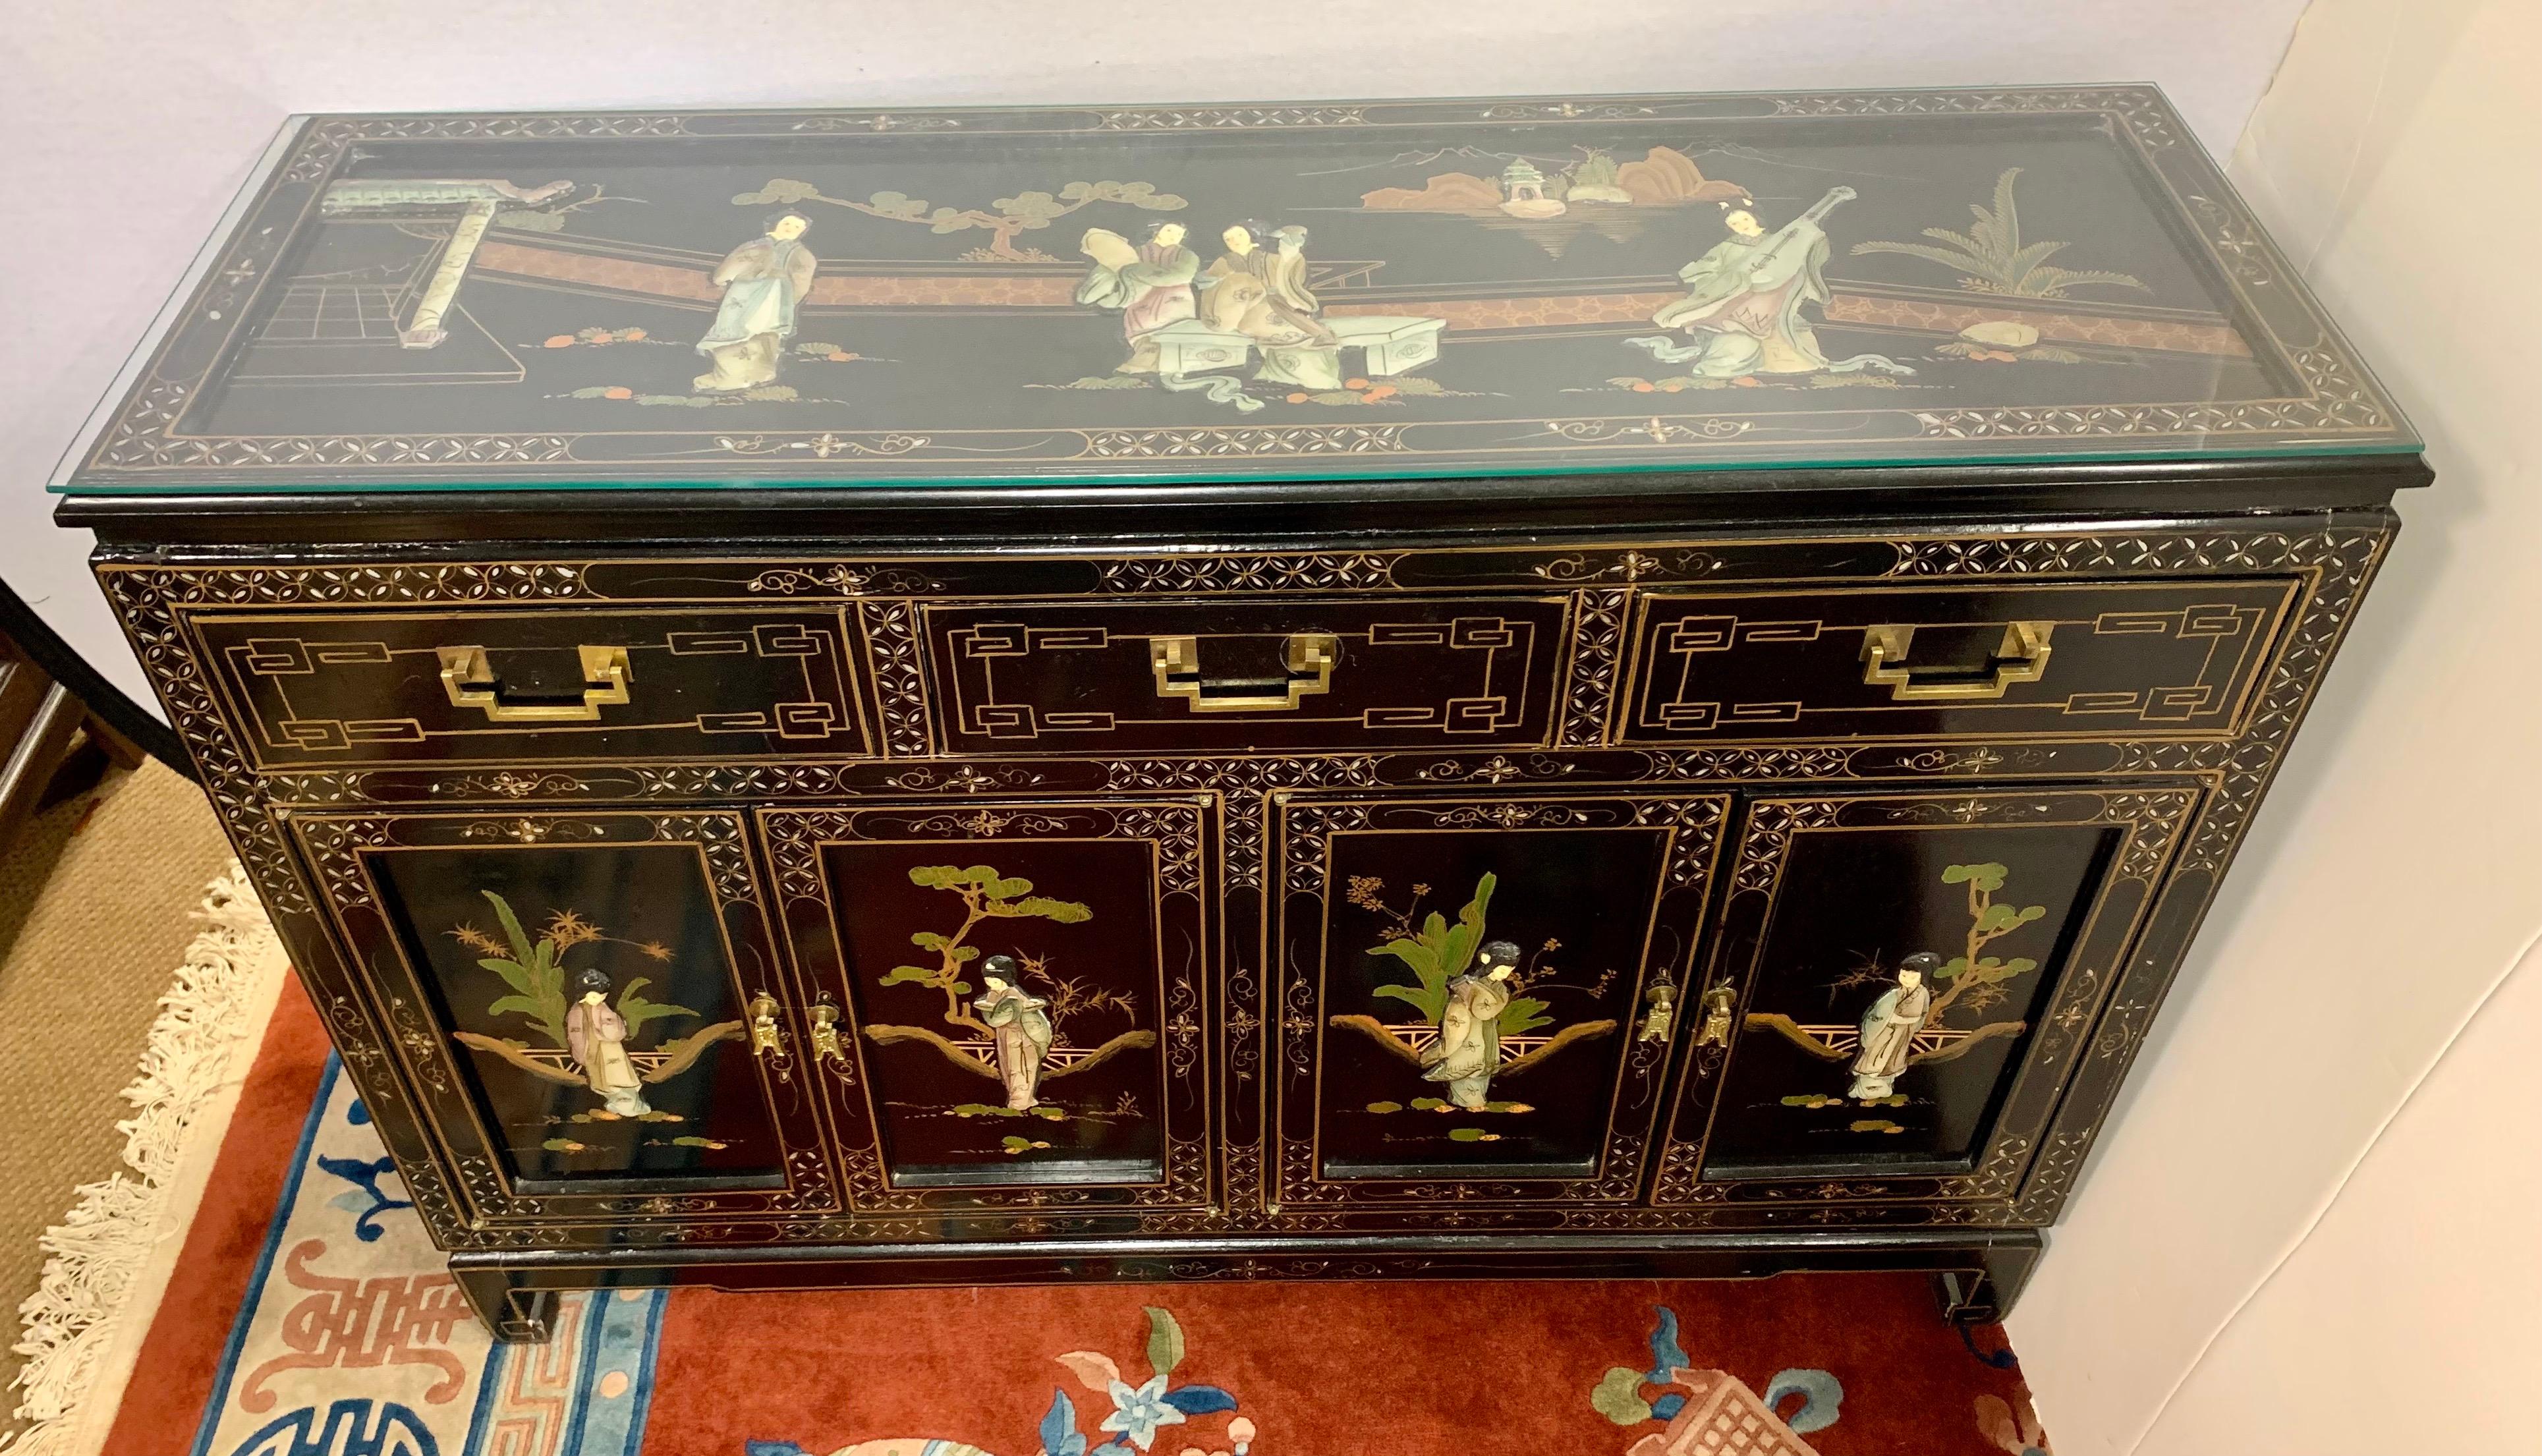 Vintage Chinese black lacquered credenza features carved hardstone figures in a landscape on the tops and doors. Handpainted gold details all around. Sides have a handpainted bamboo and leaf motif. Has three drawers over four doors that open to